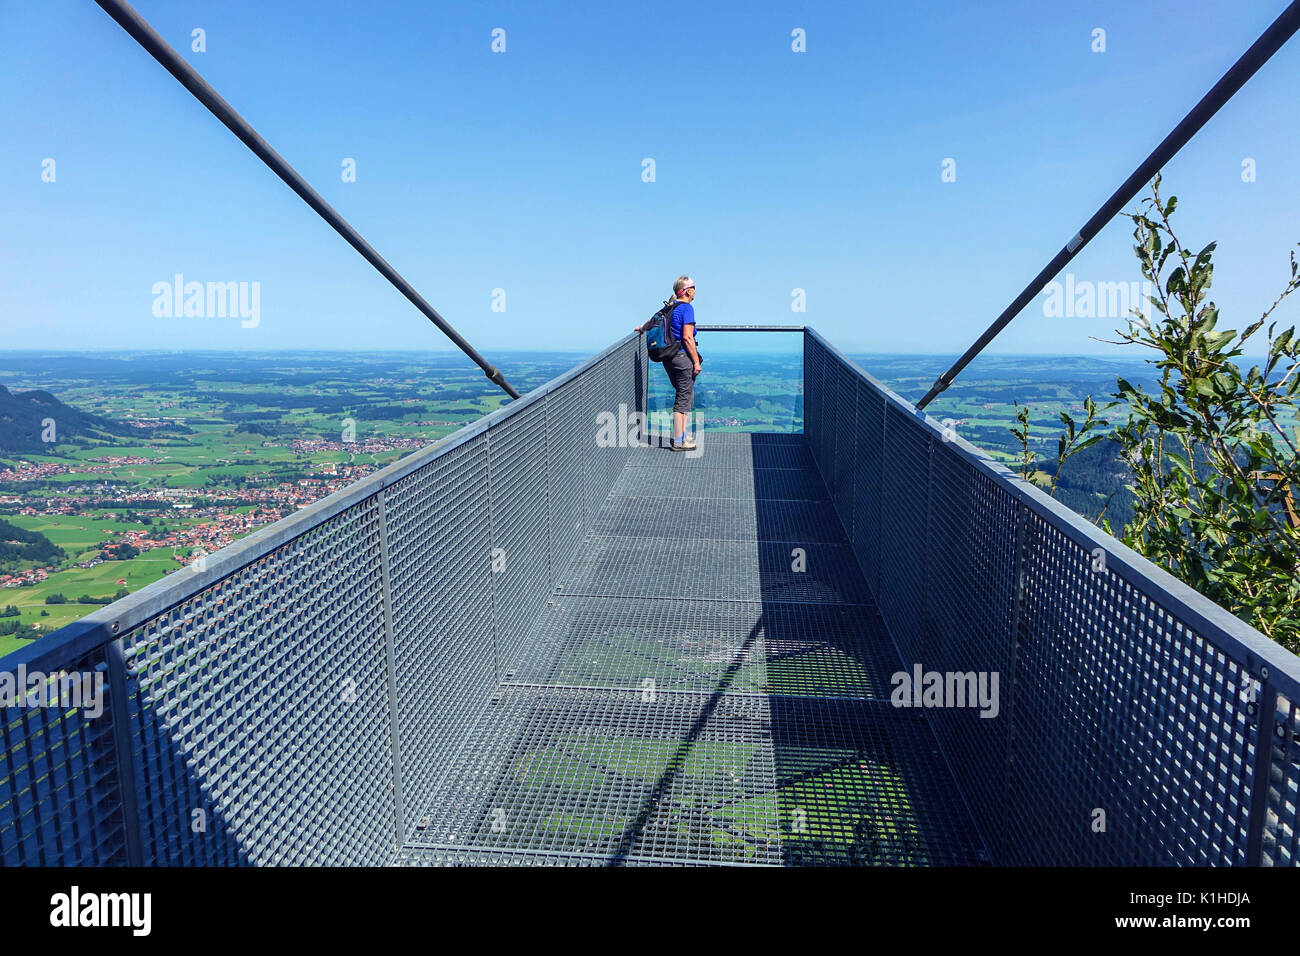 Solitary female figure on walkway viewpoint above Skigebiet Breitenberg-Hochalpe cable car, Pfronten, Bavaria, Germany Stock Photo